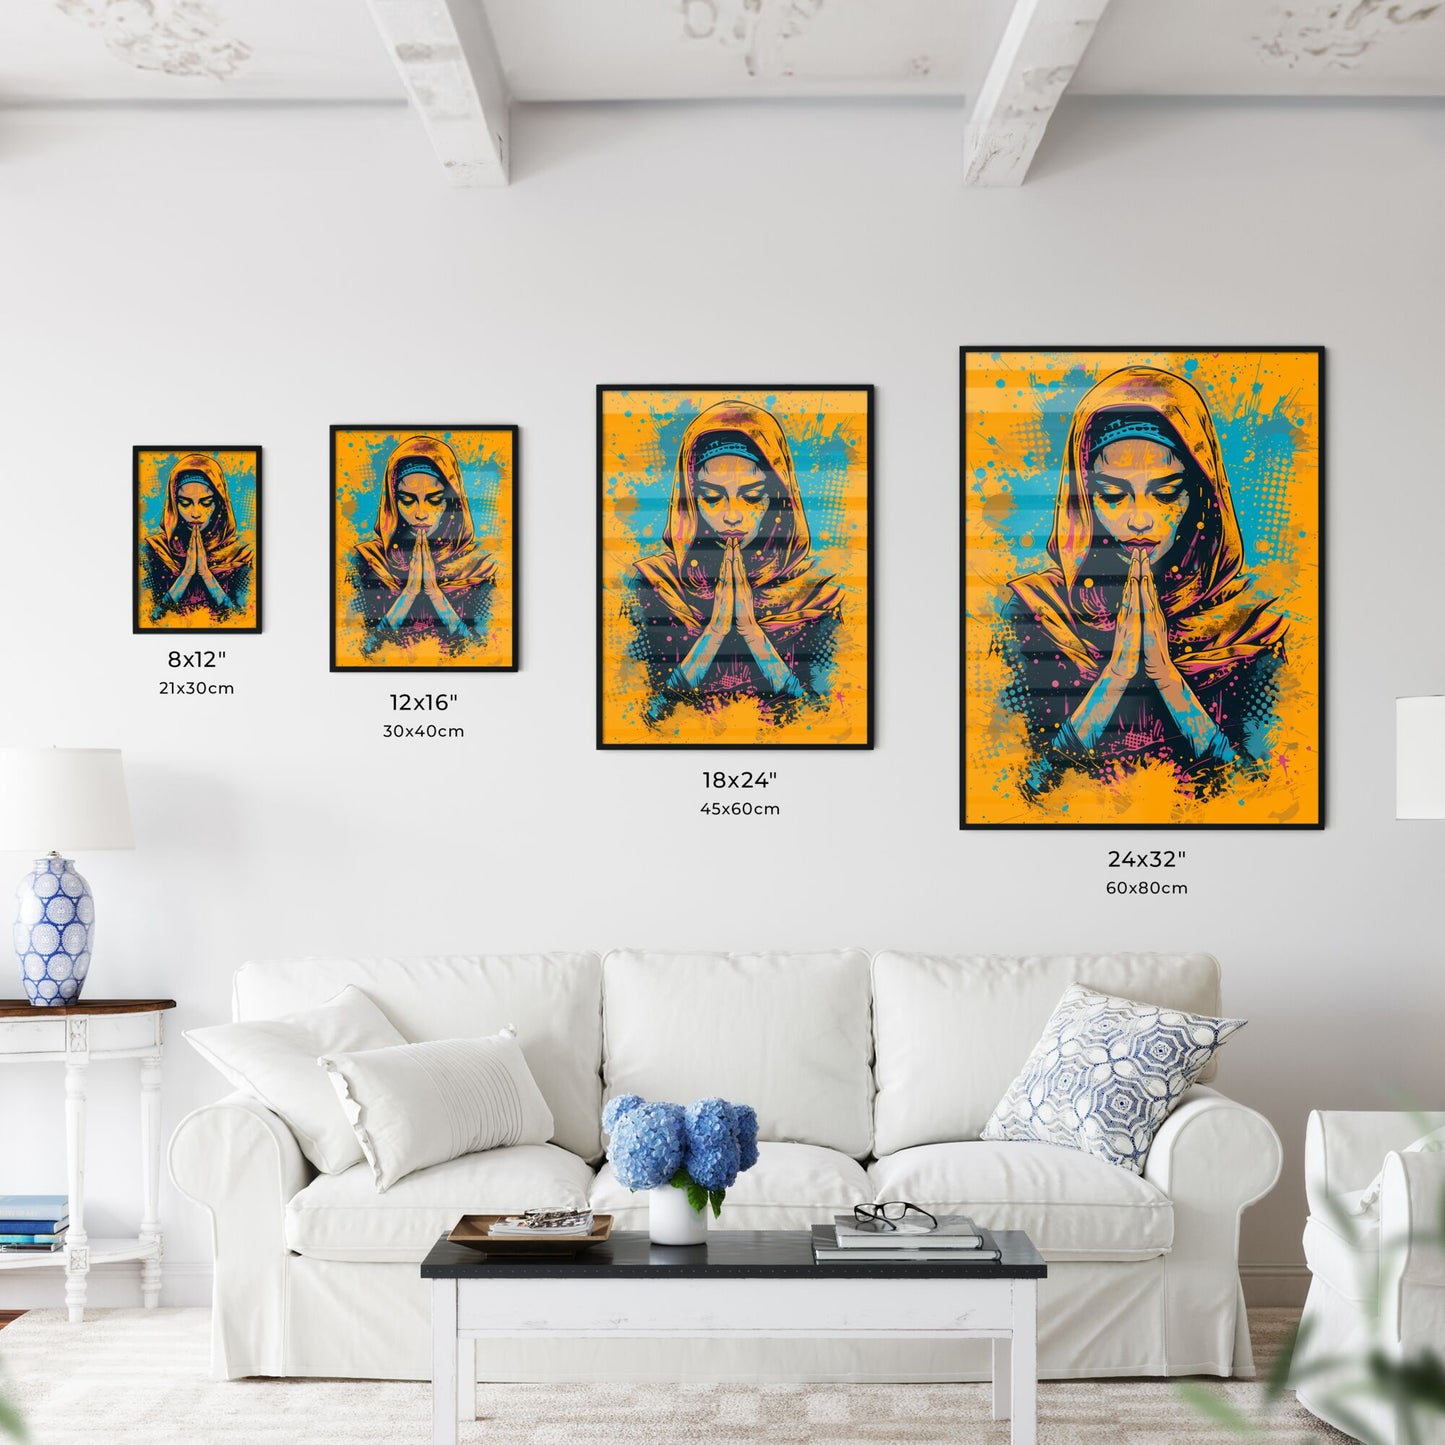 Saint mary anime - pop art style - comic book style - Art print of a woman with her hands together in prayer Default Title